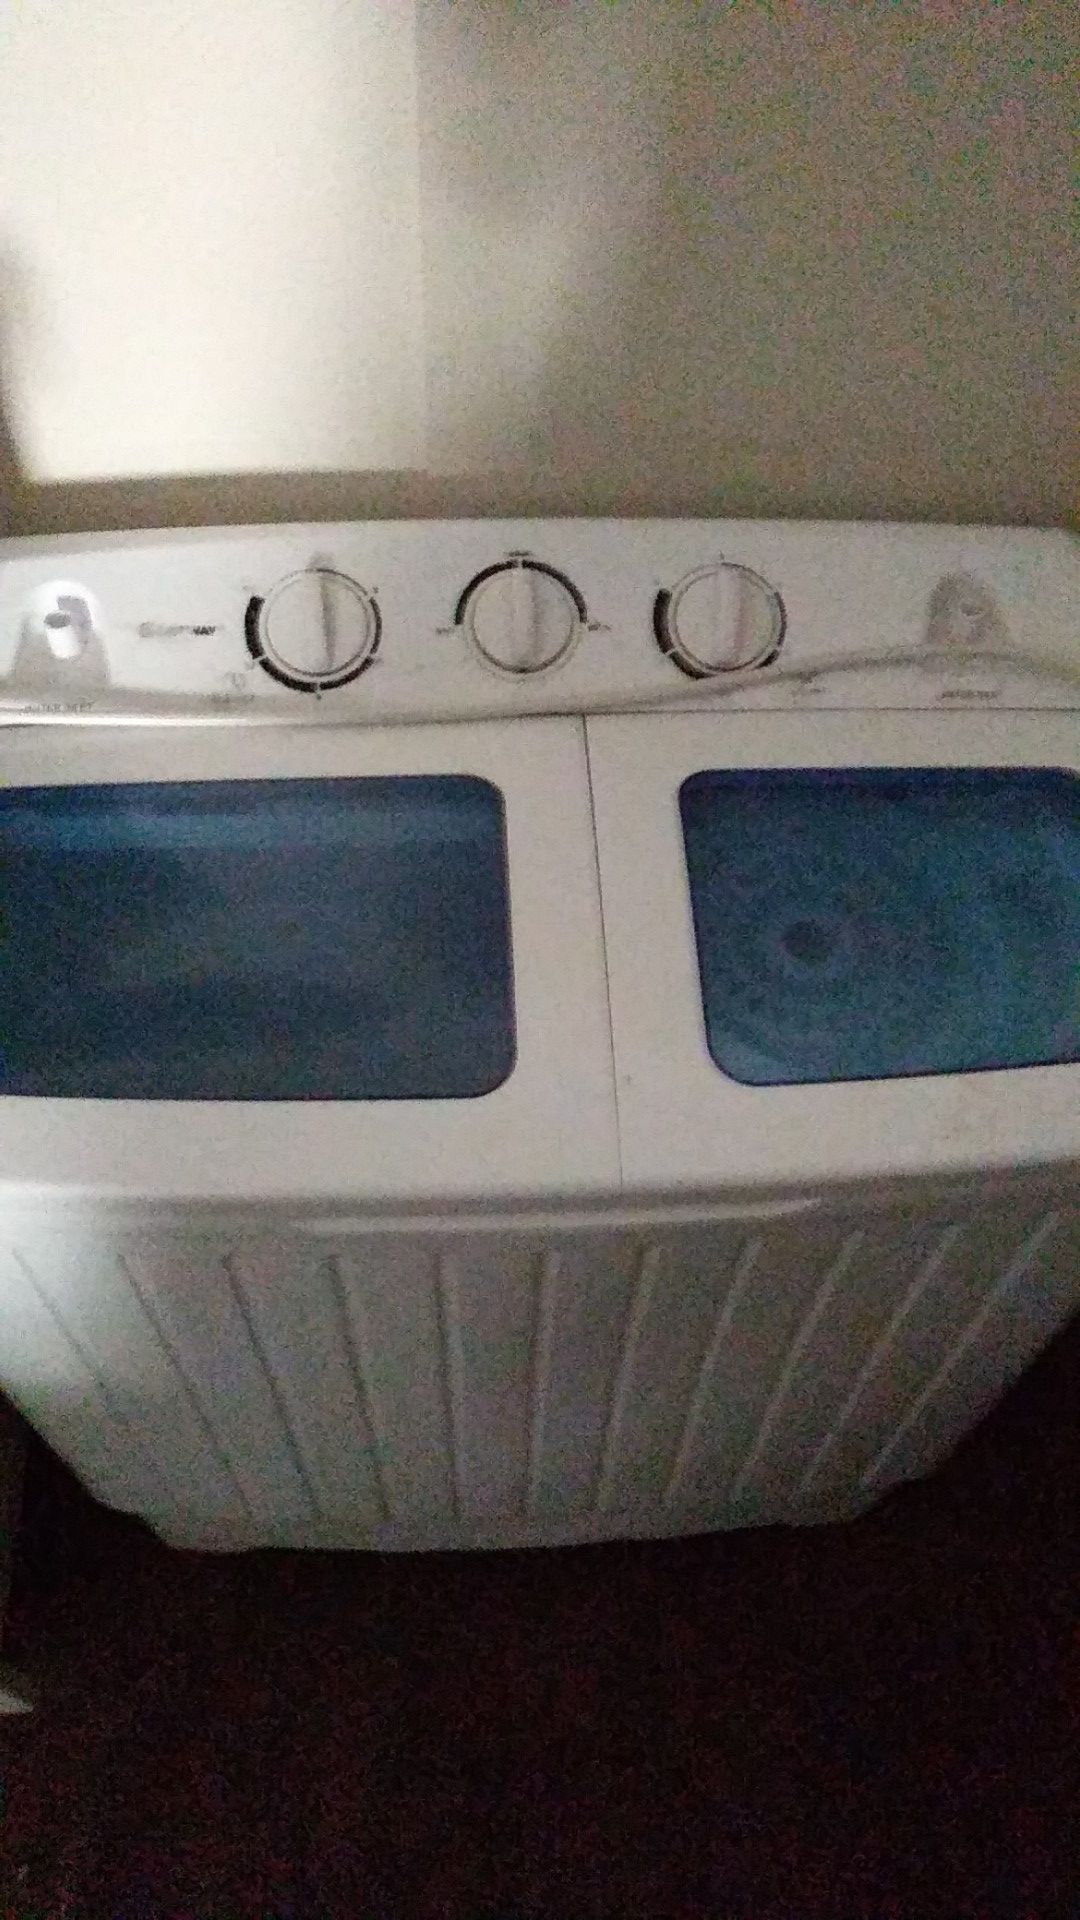 Portable washer